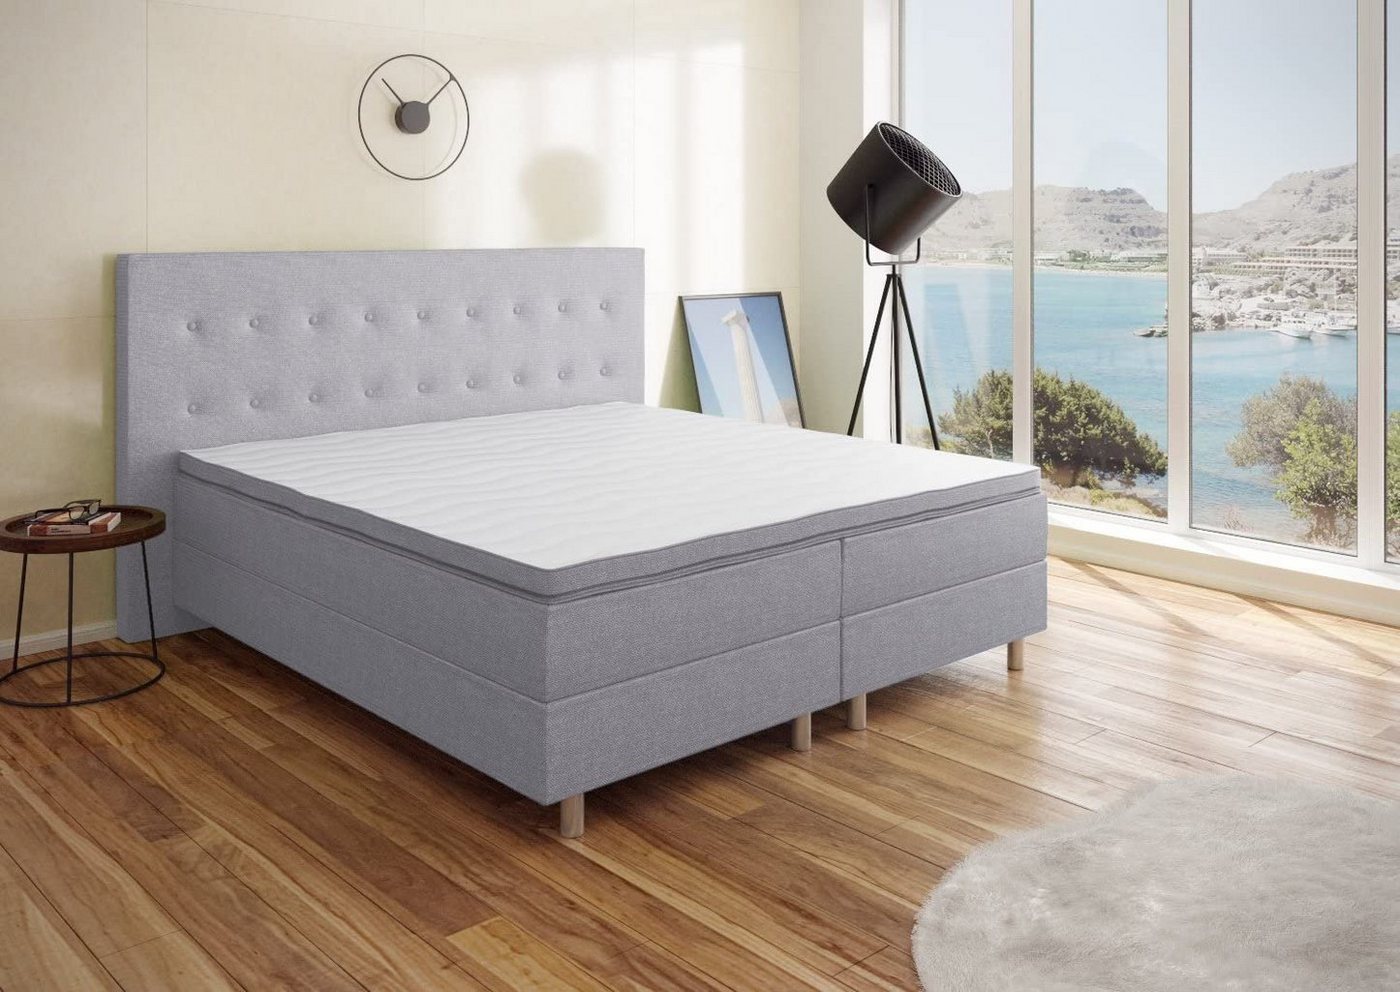 Best for You Boxspringbett Neo, mit Topper von Best for You